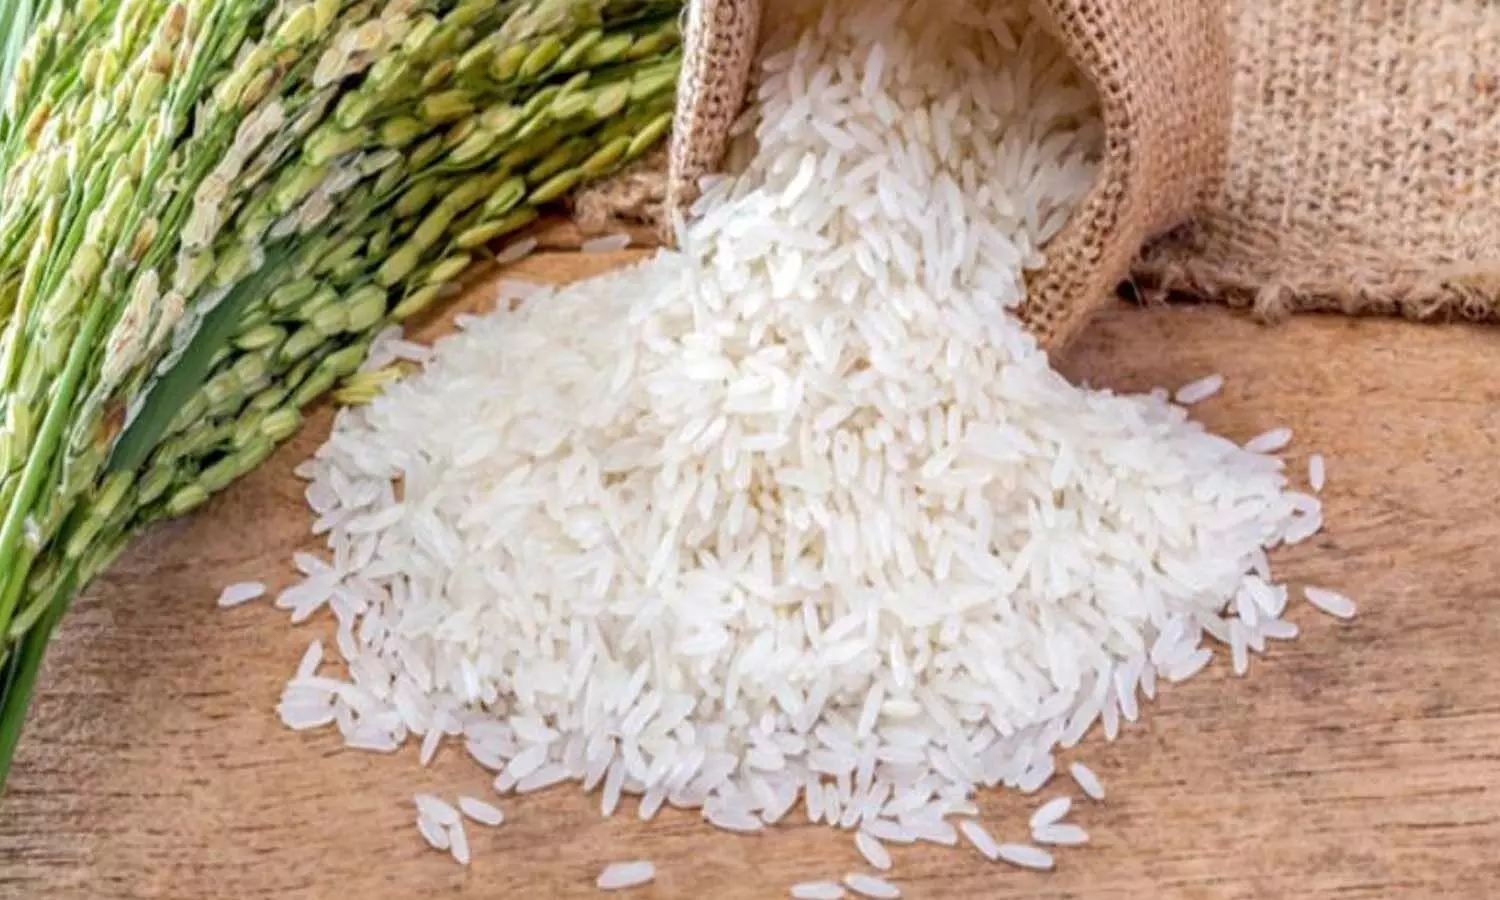 Rice became expensive in the market, from July 18, the price will increase further